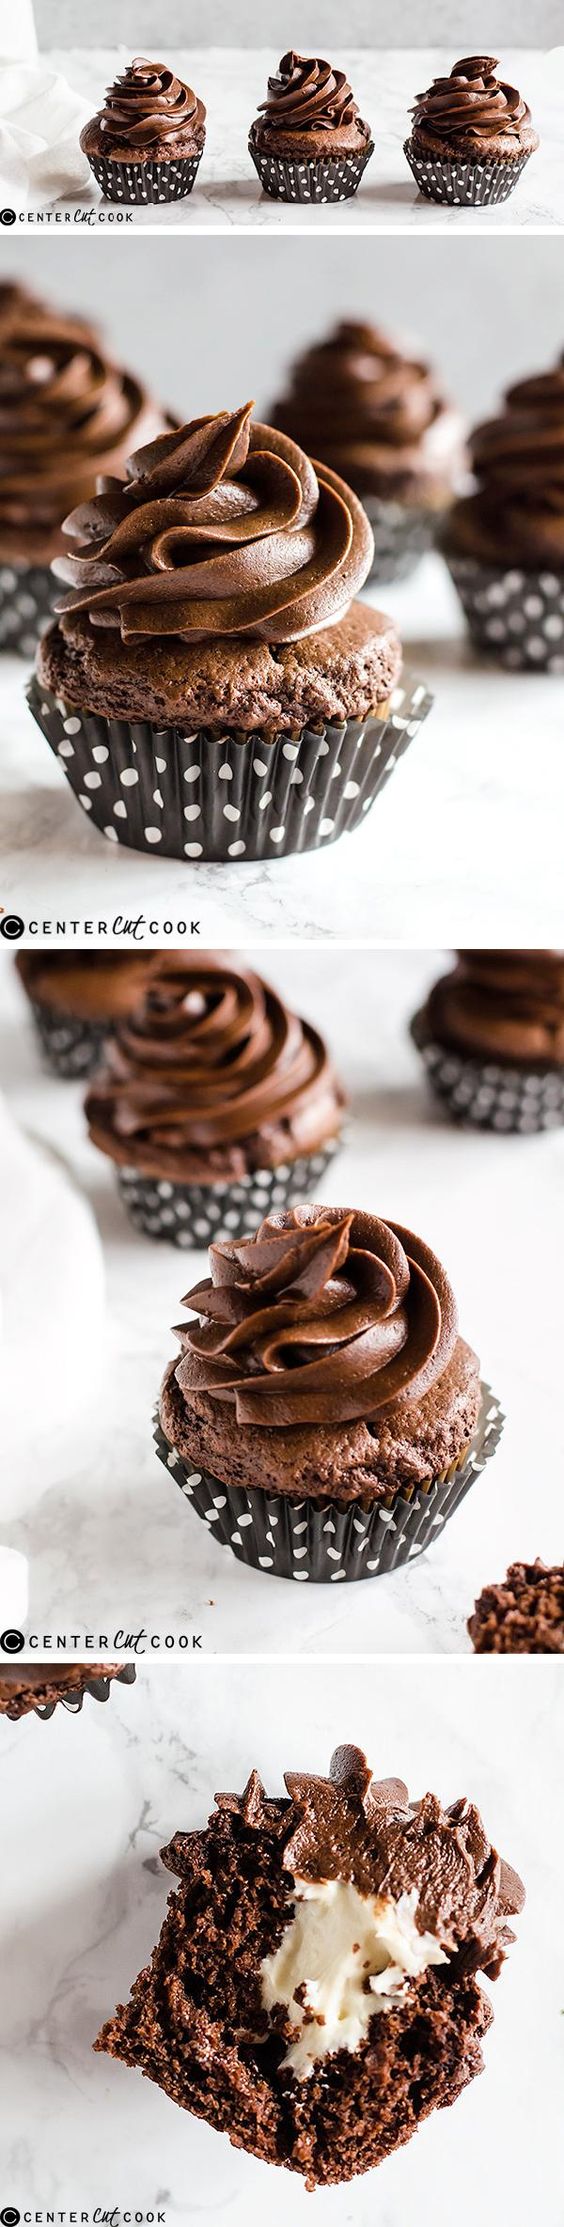 Chocolate Cupcakes with Cheesecake Filling